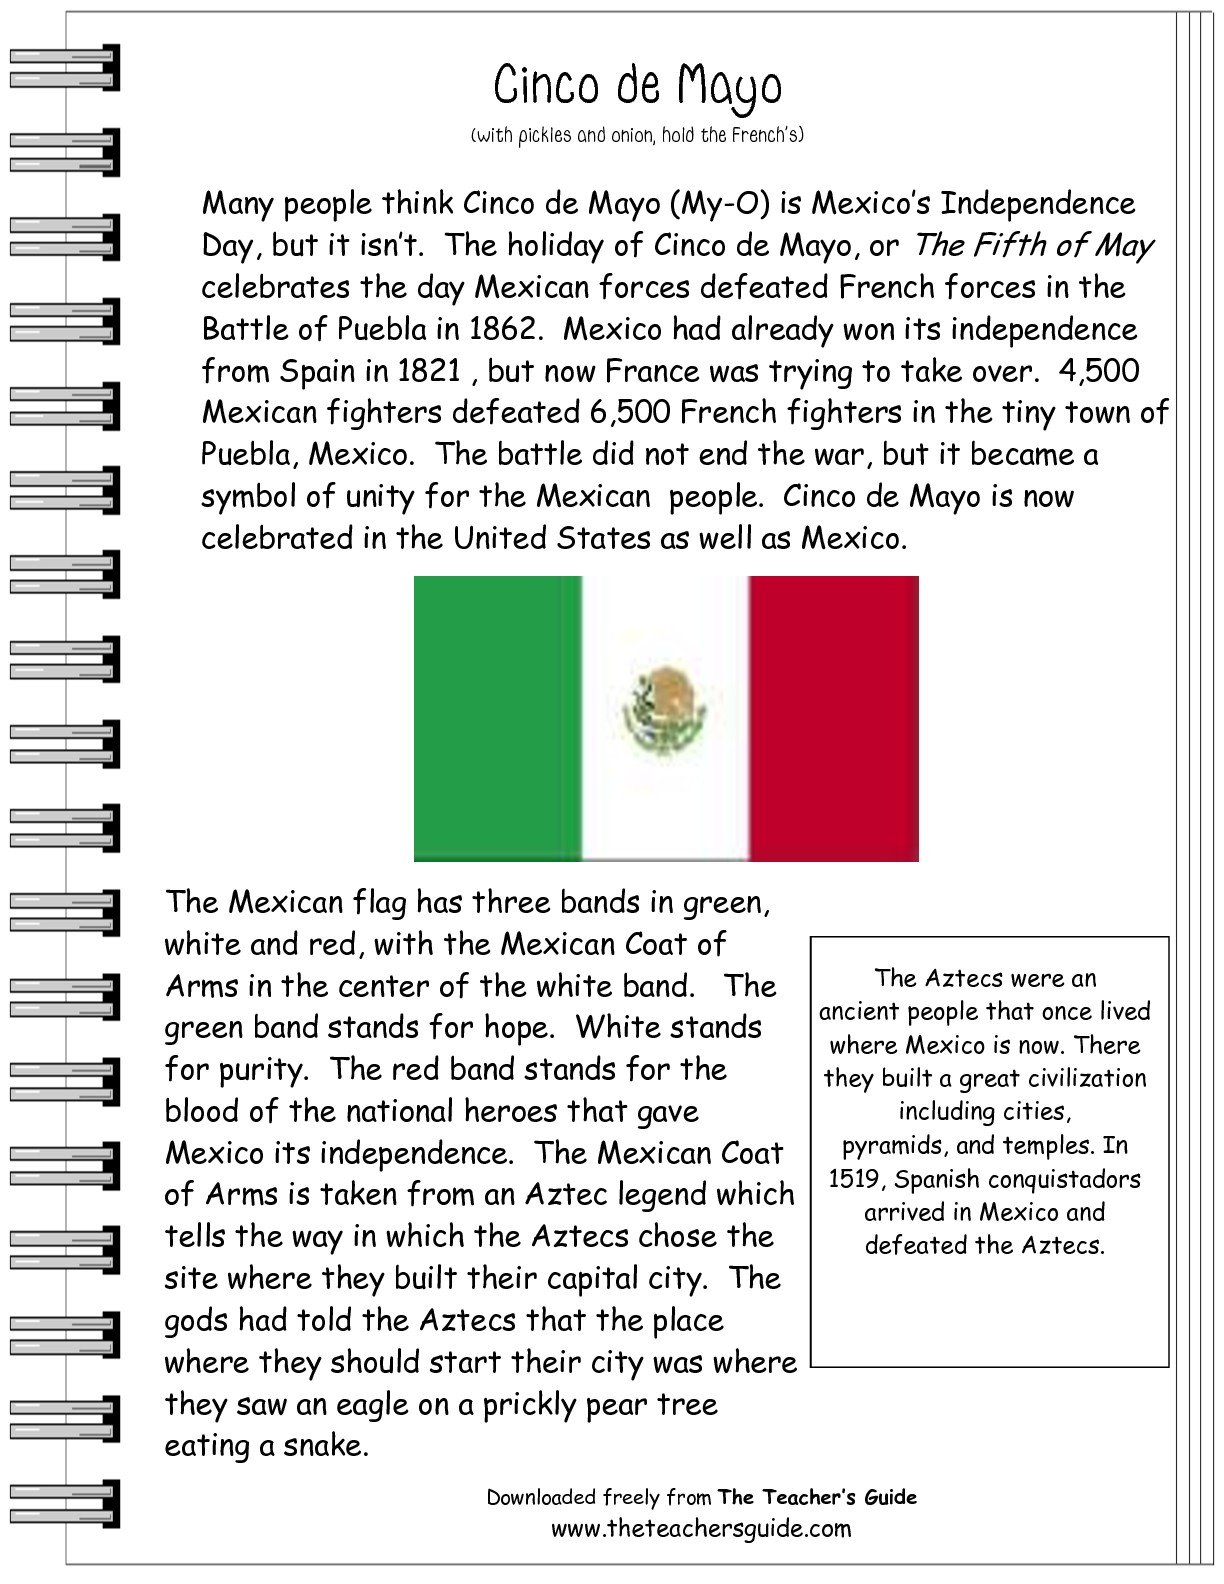 free-printable-short-stories-for-high-school-students-free-printable